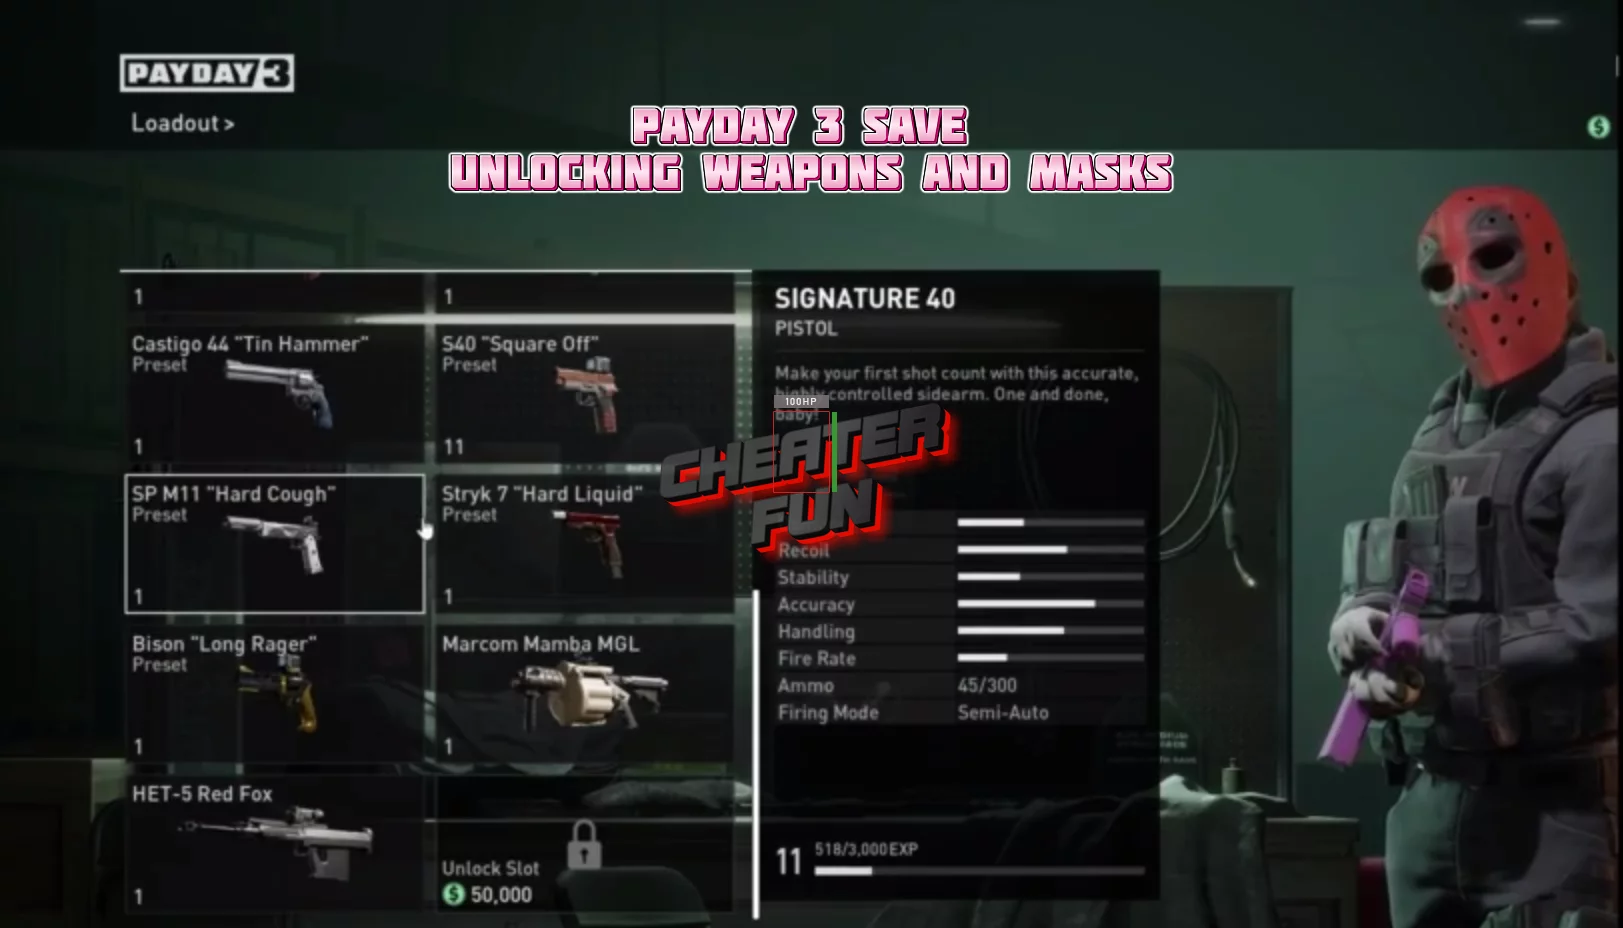 Payday 3 Save - Unlocking weapons and masks